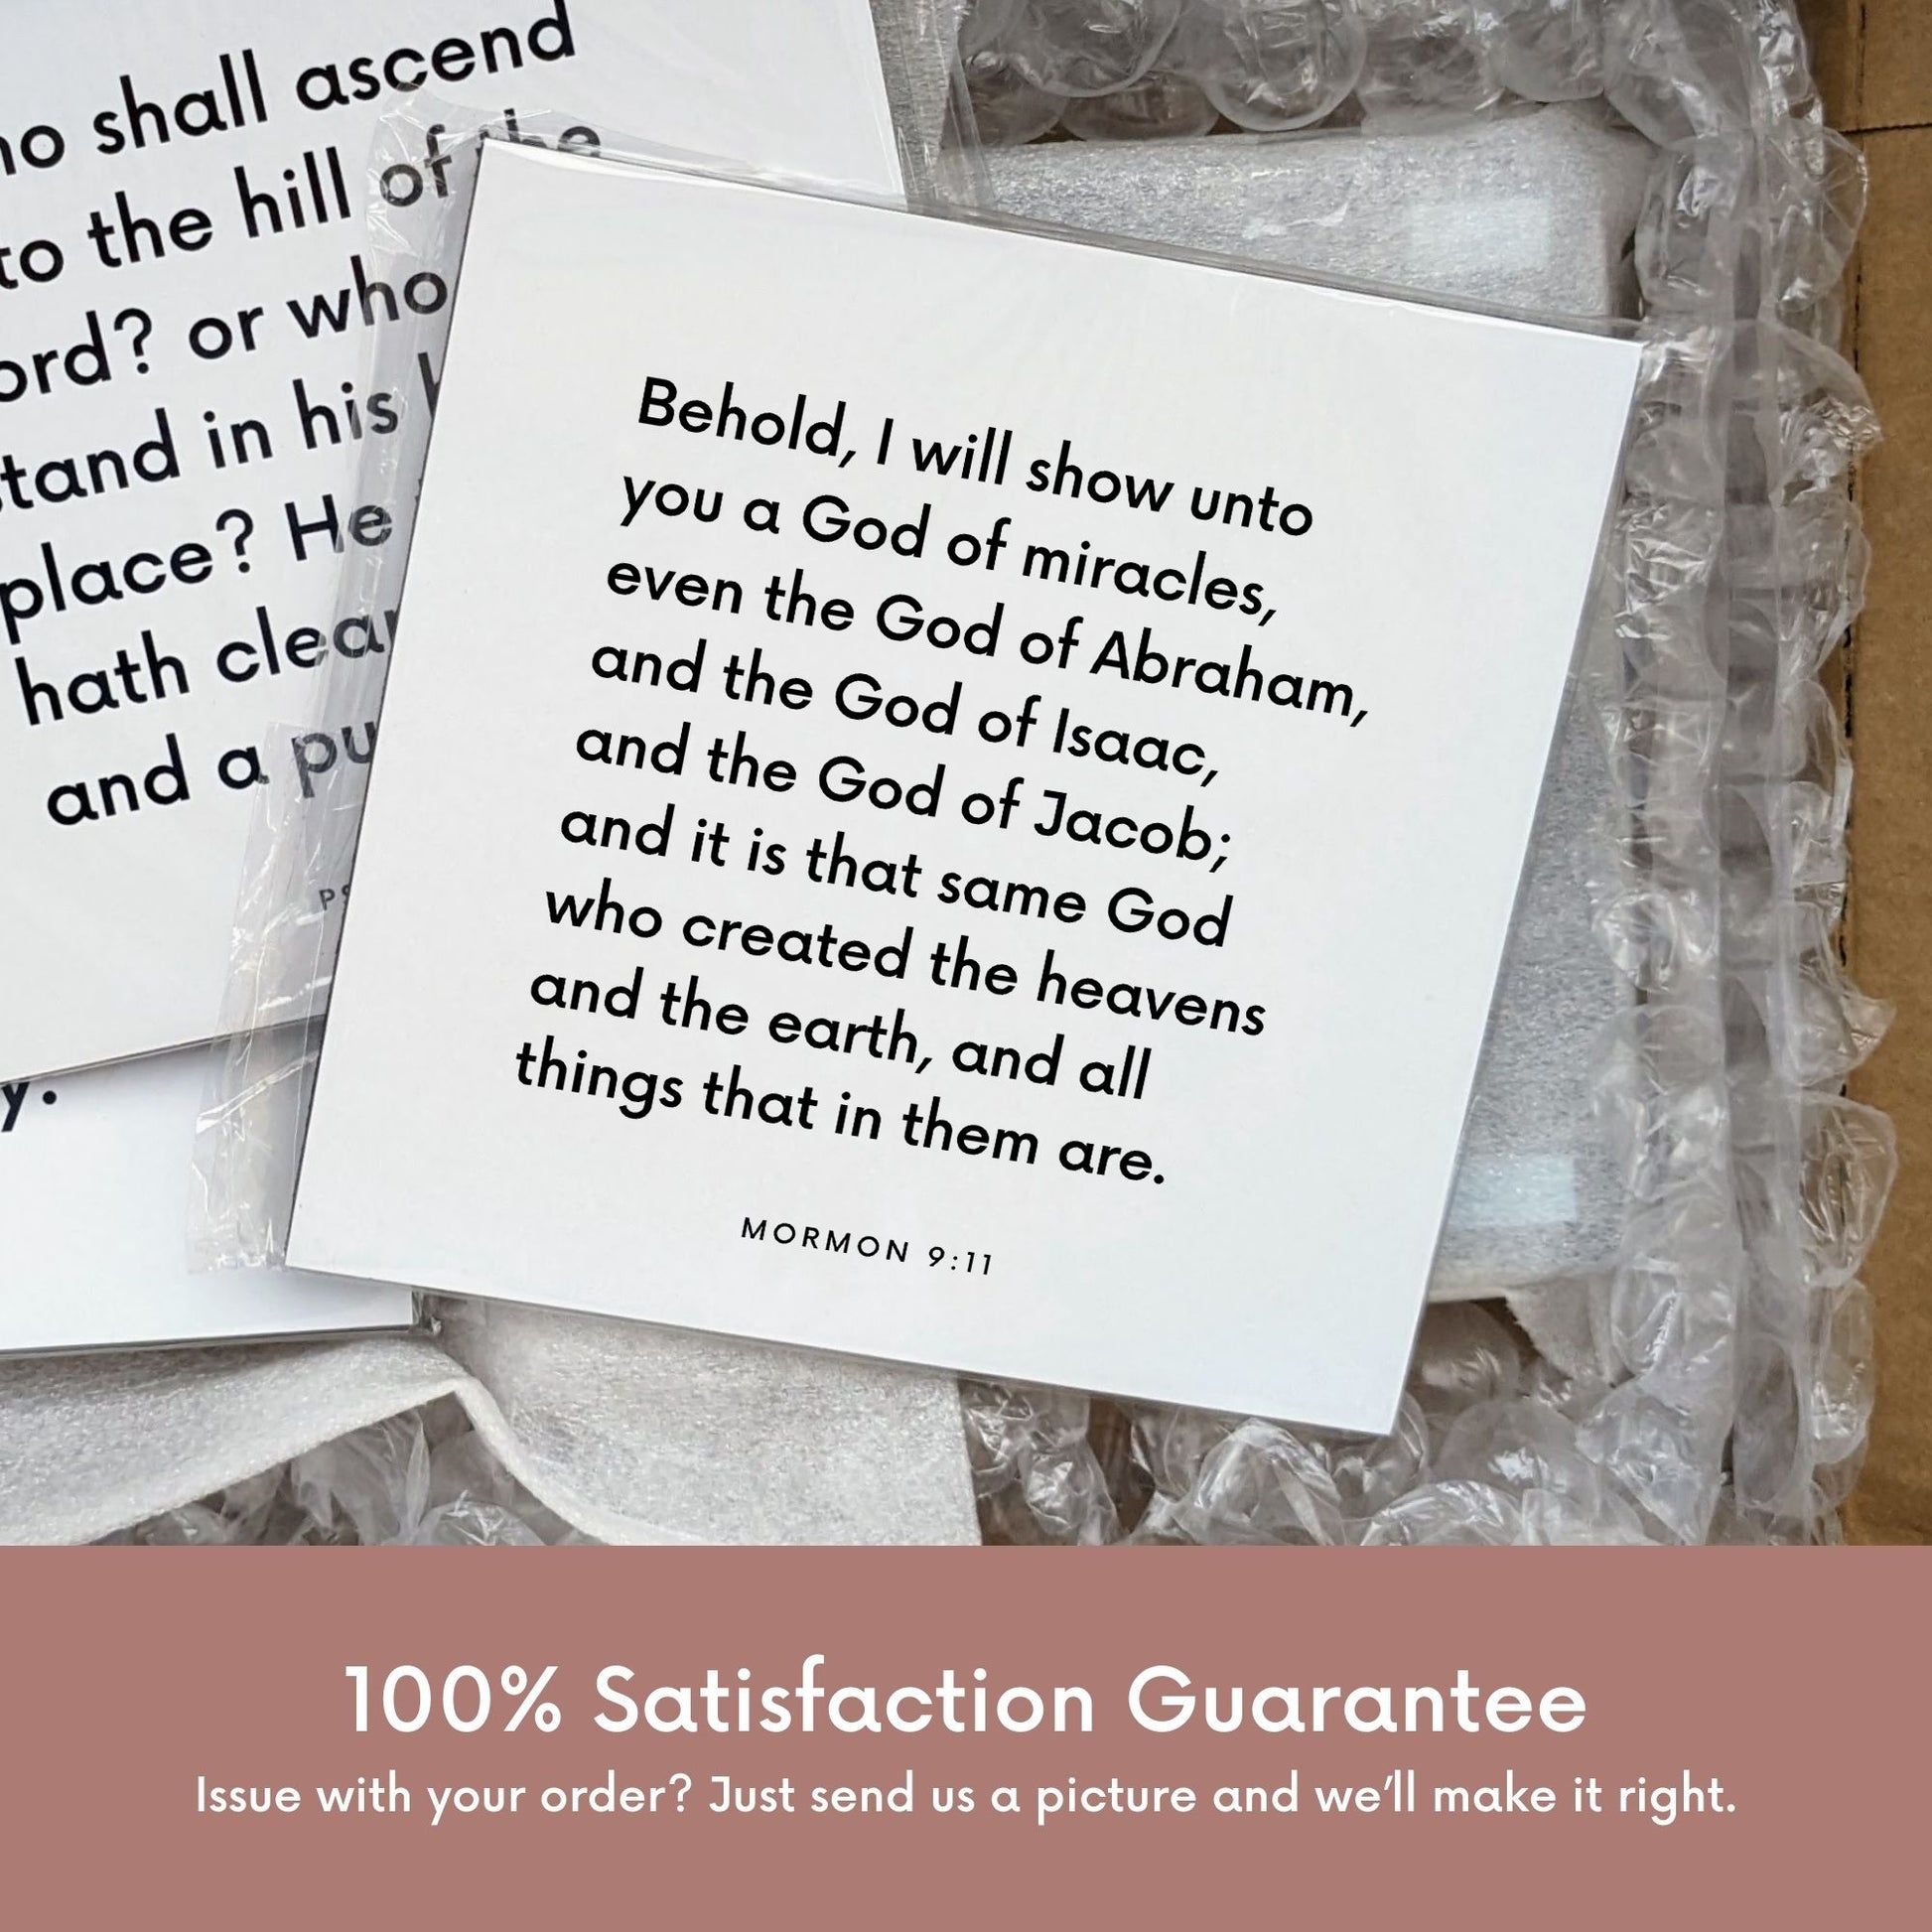 Shipping materials for scripture tile of Mormon 9:11 - "I will show unto you a God of miracles"